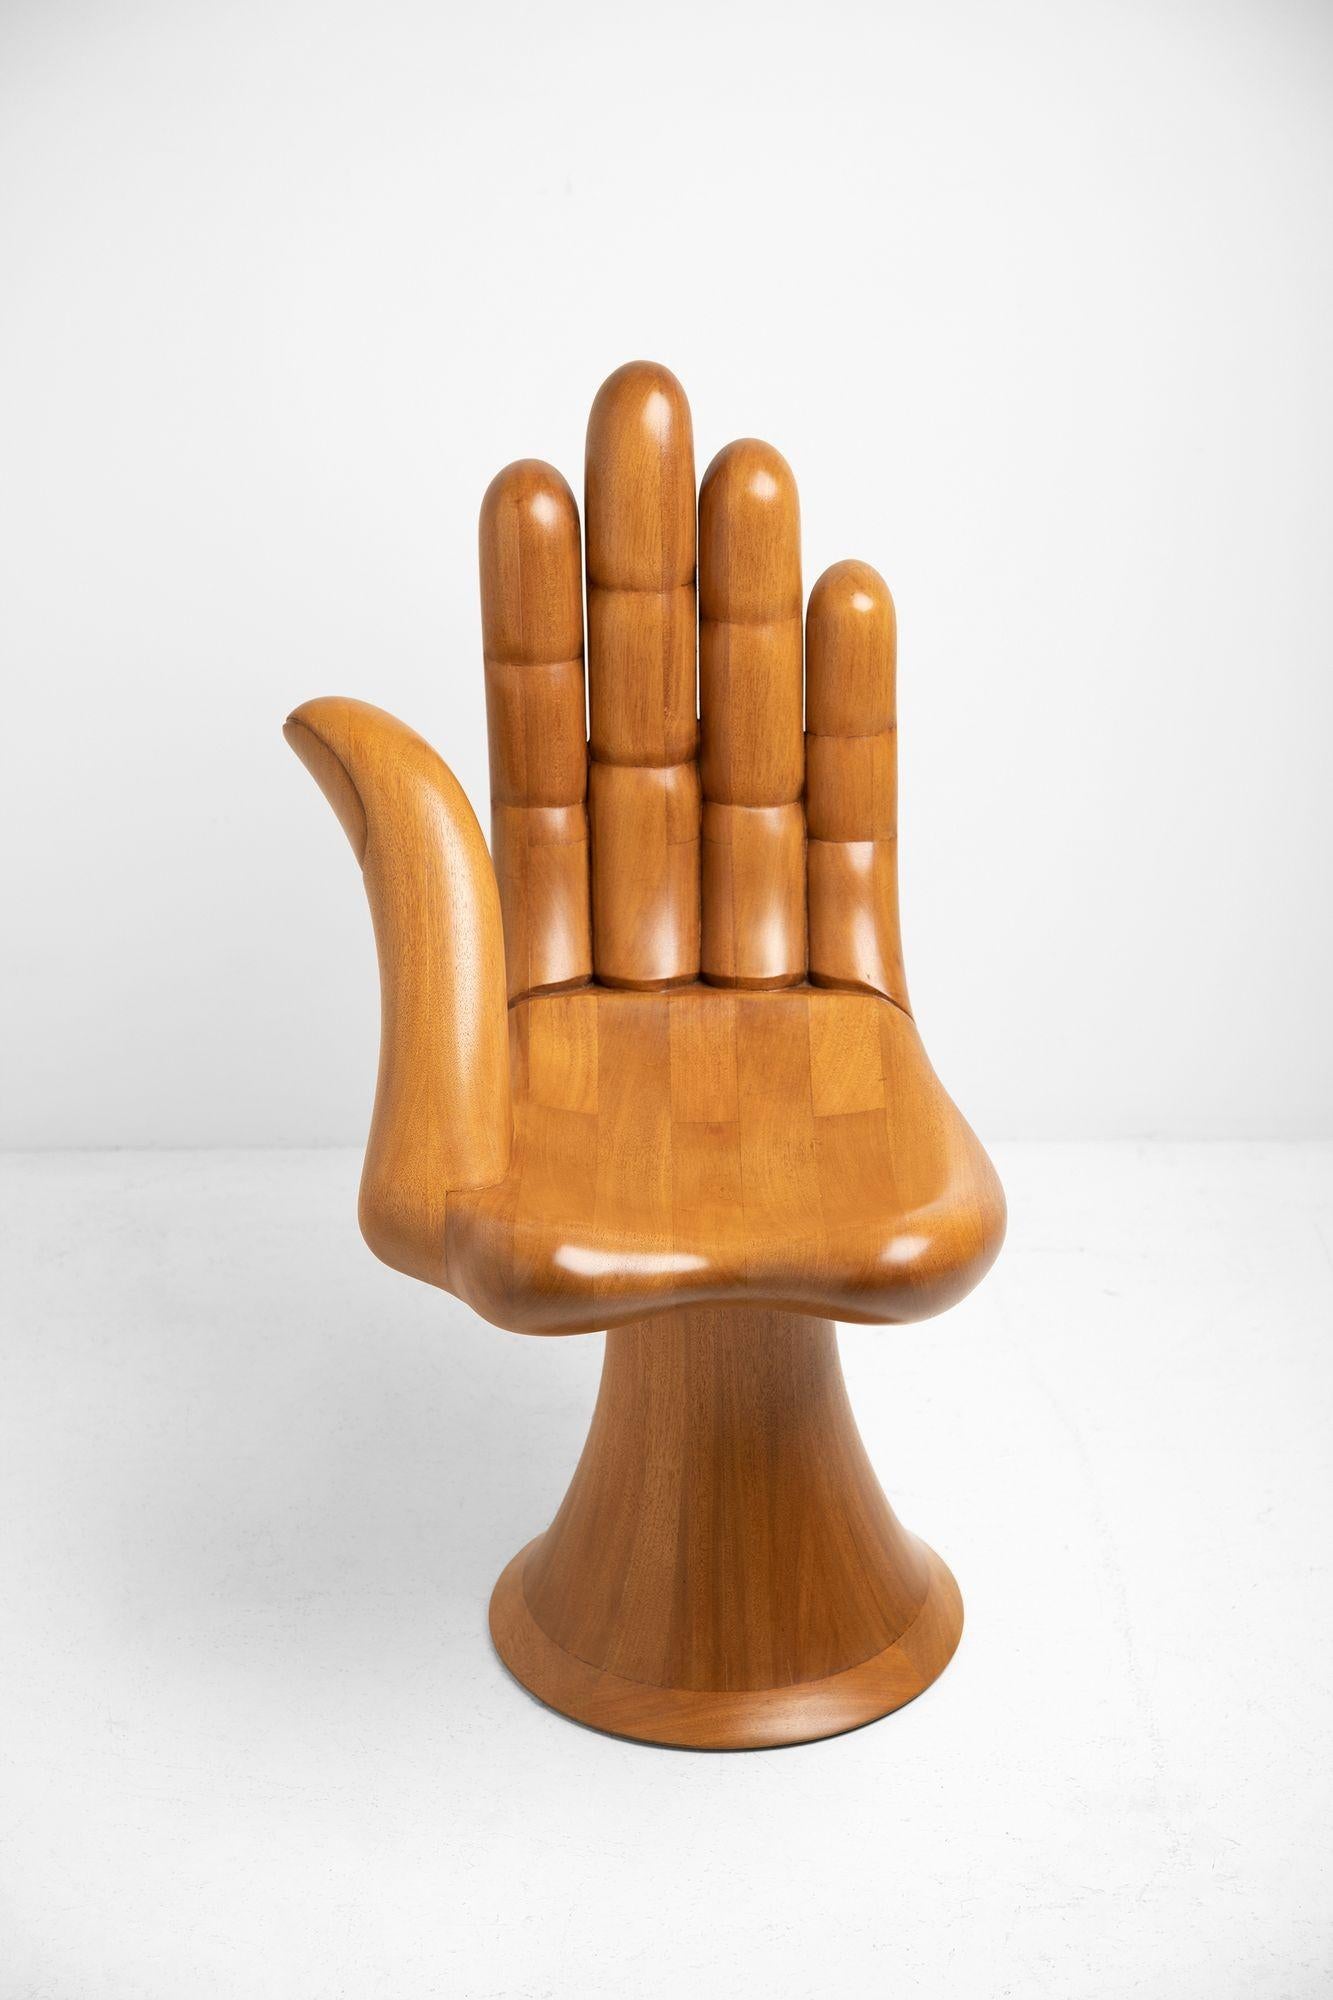 artist pedro friedeberg designed a chair shaped like what